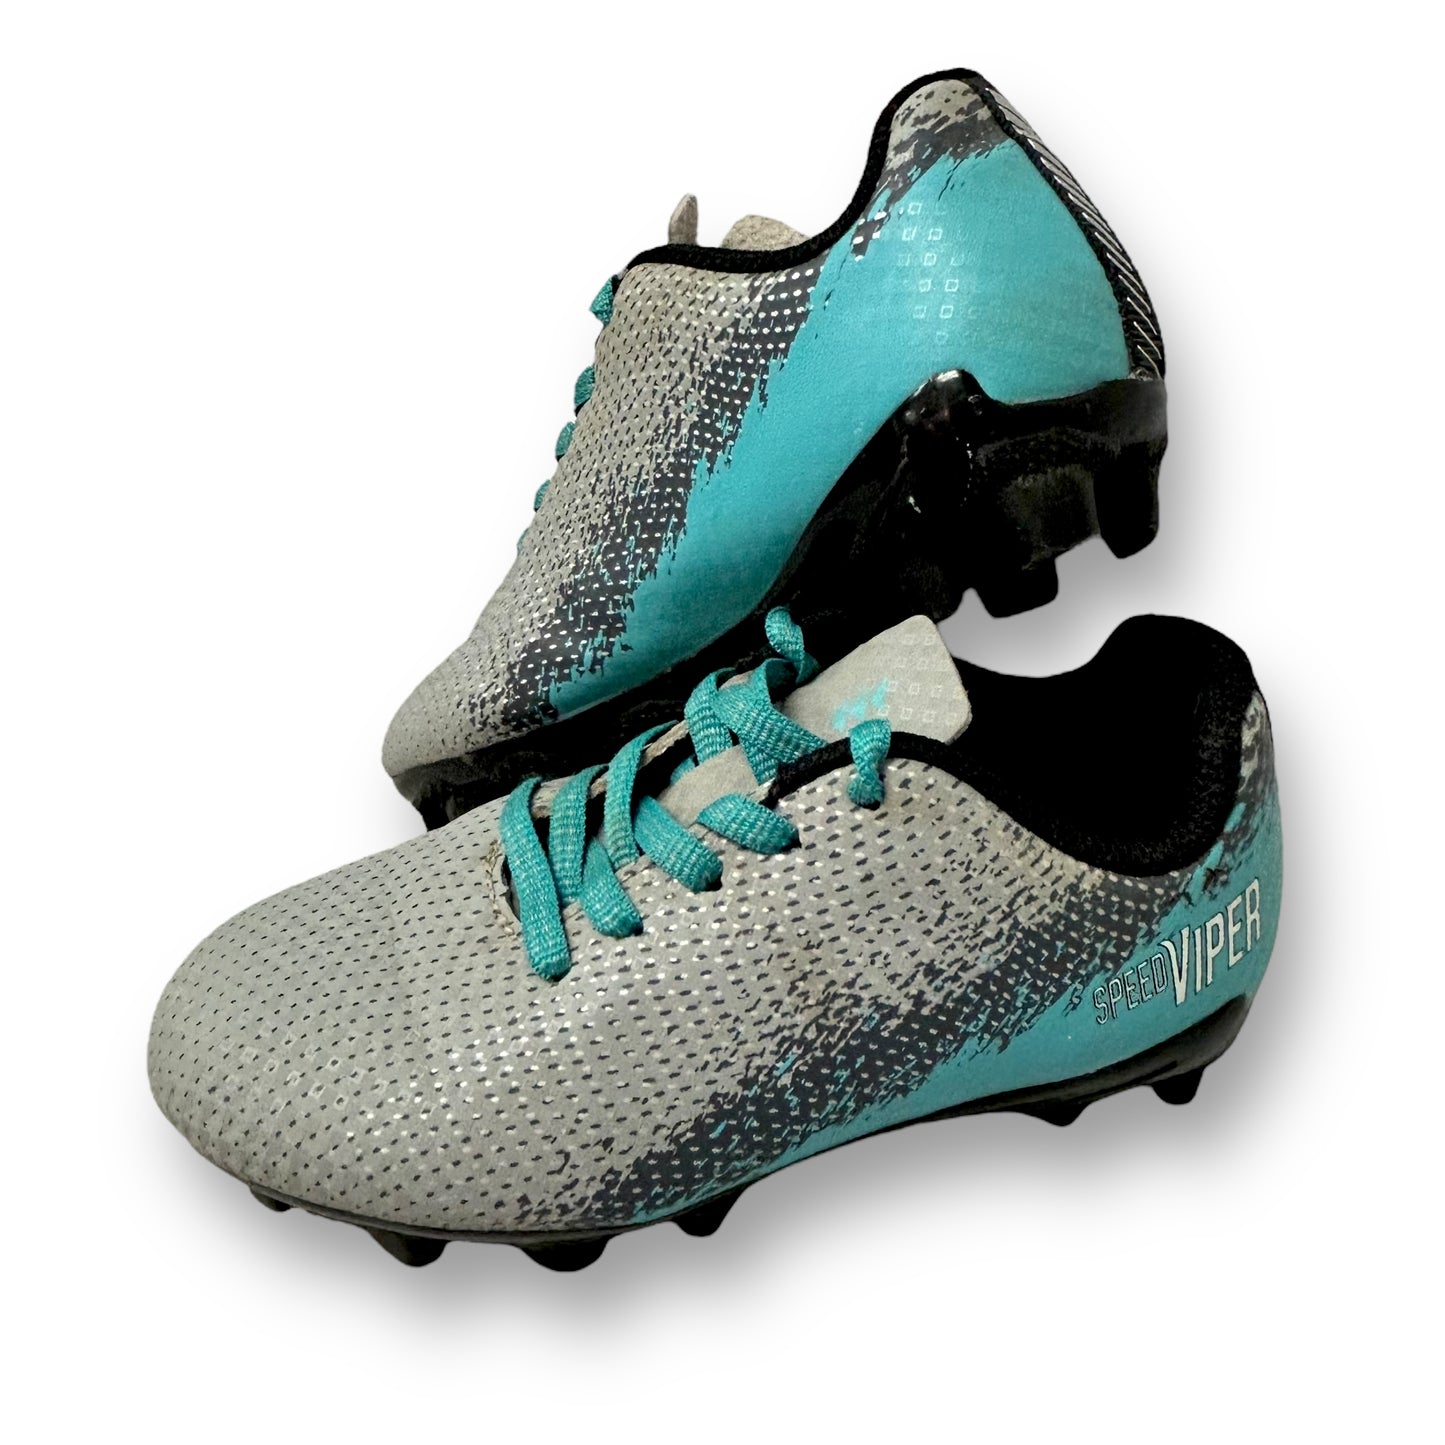 DSG Toddler Girl Size 9 Aqua & Silver Lace-Up Soccer Cleats